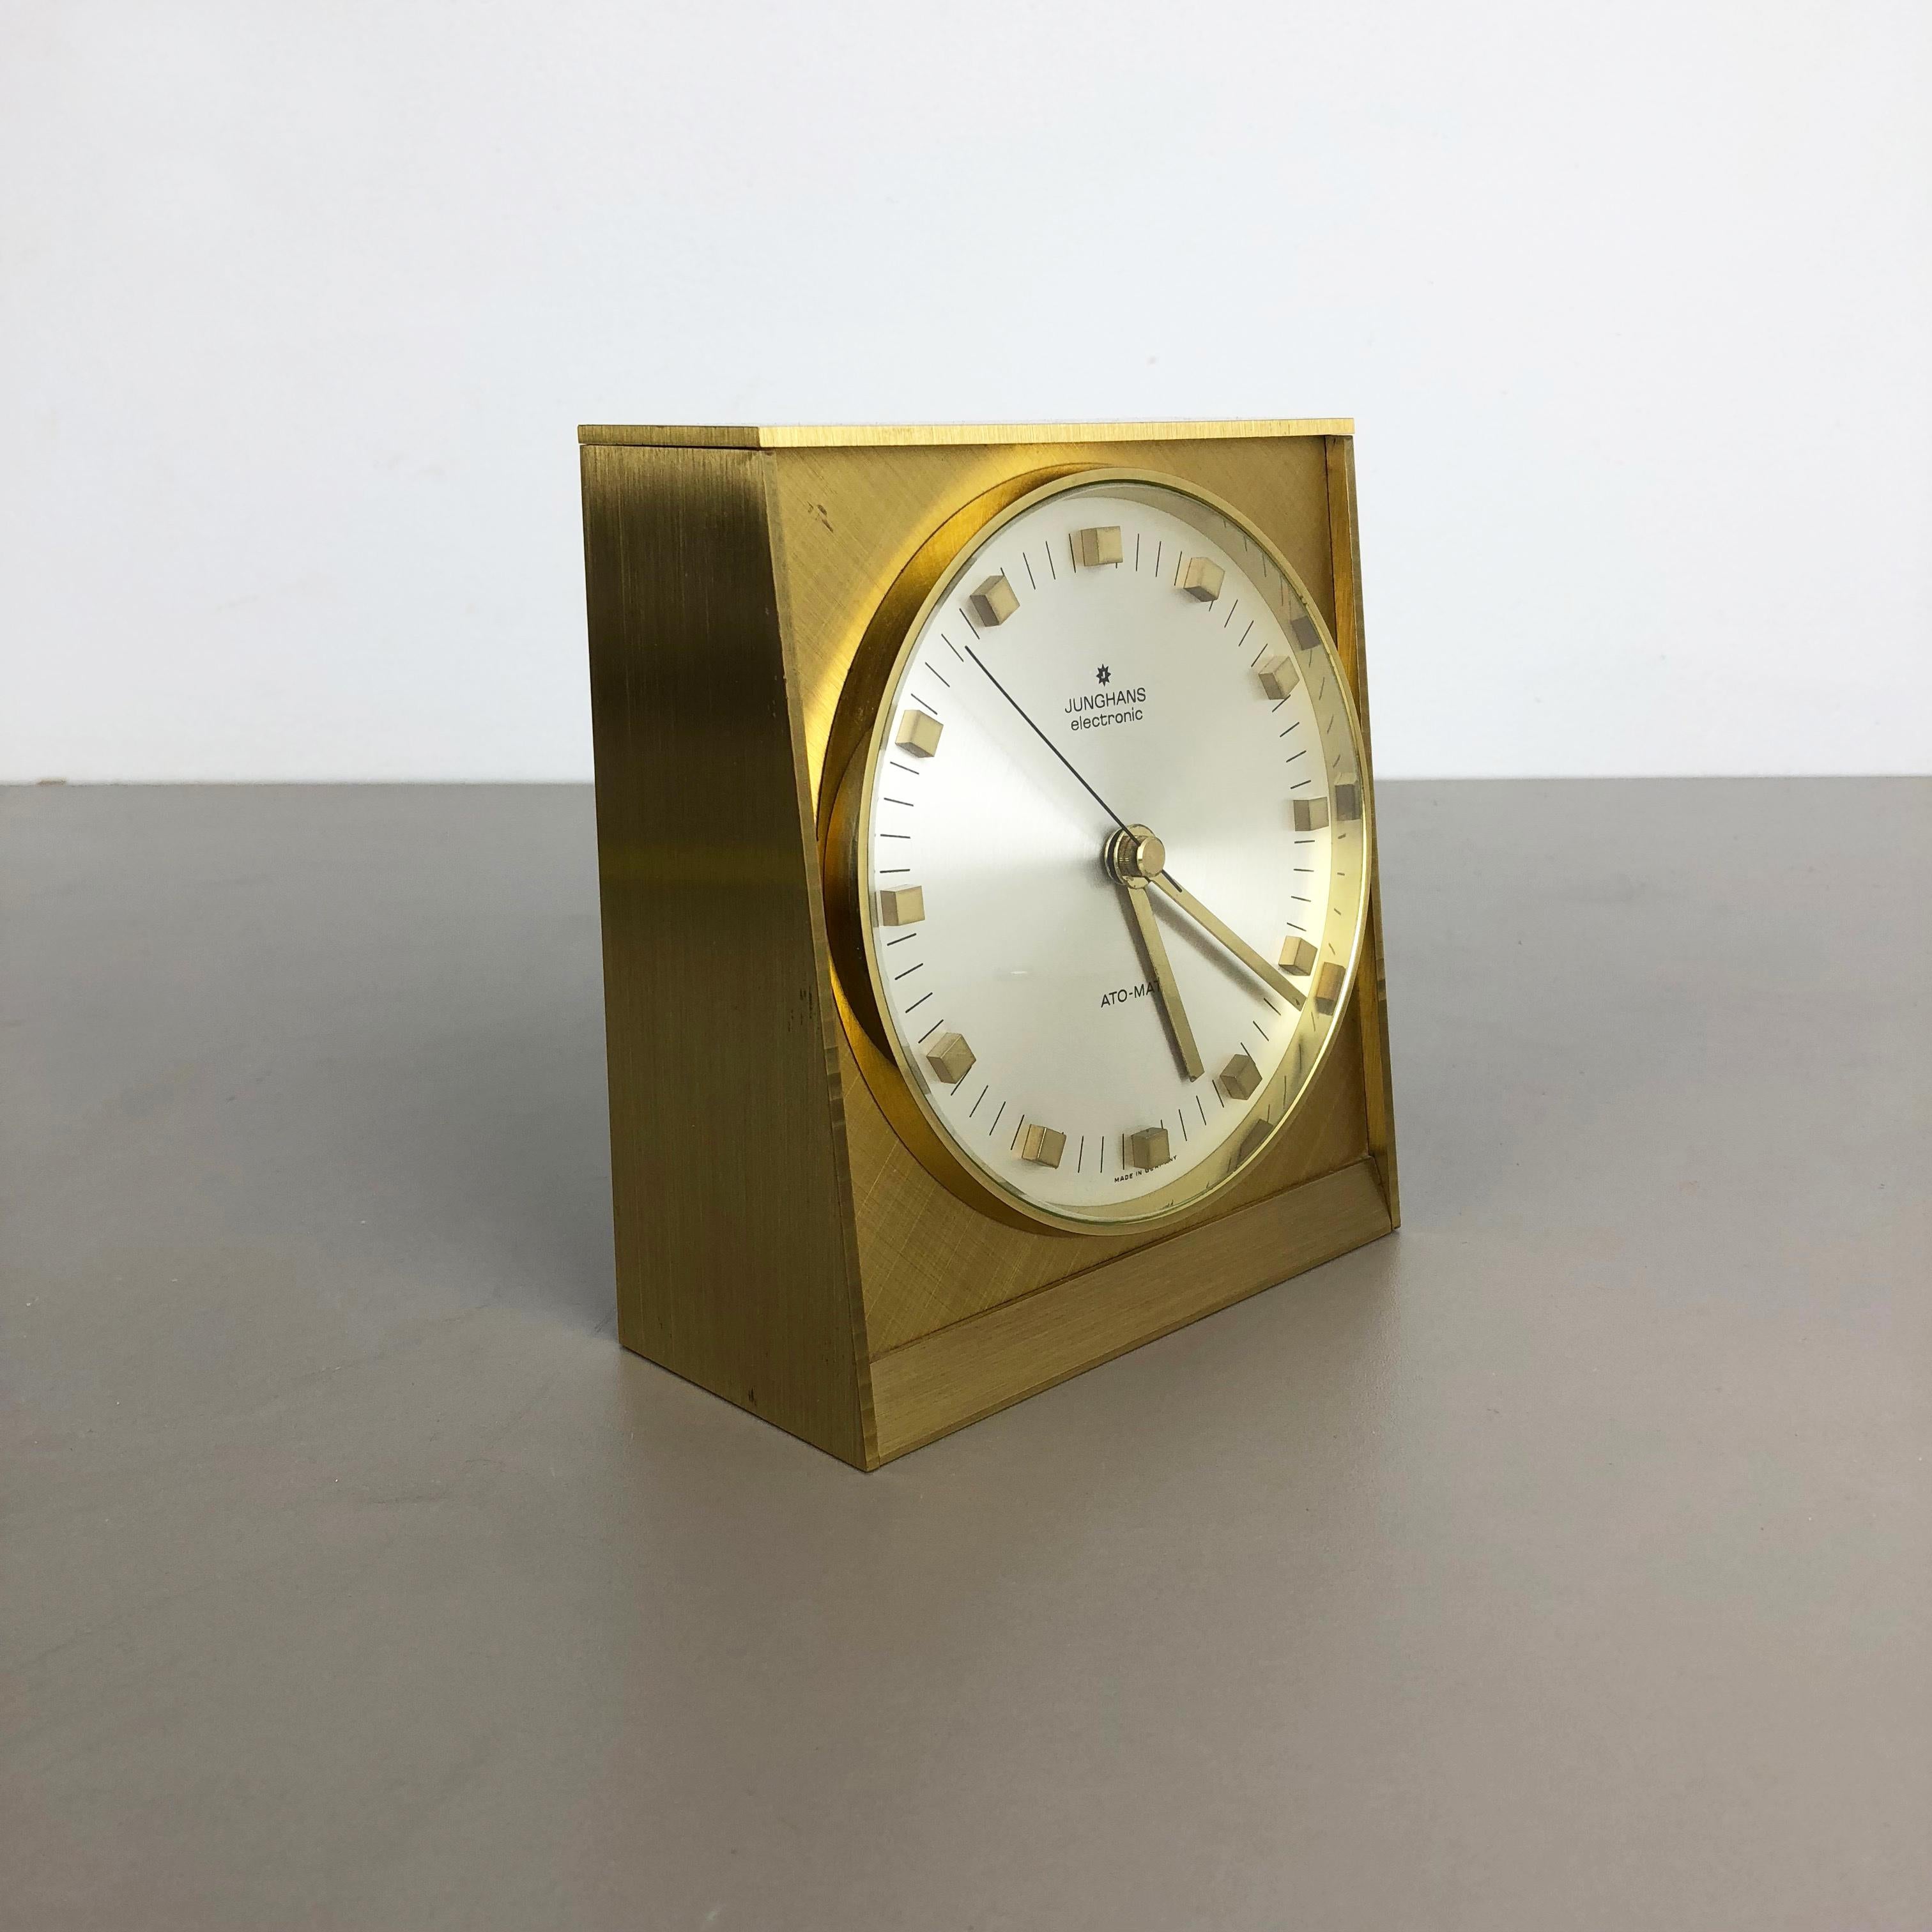 Article:

Table clock



Origin:

Germany


Producer:

Junghans Electronic, Germany


Age:

1960s





This original vintage table clock was produced in the 1960s by the premium clock producer Junghans in Germany. The clock